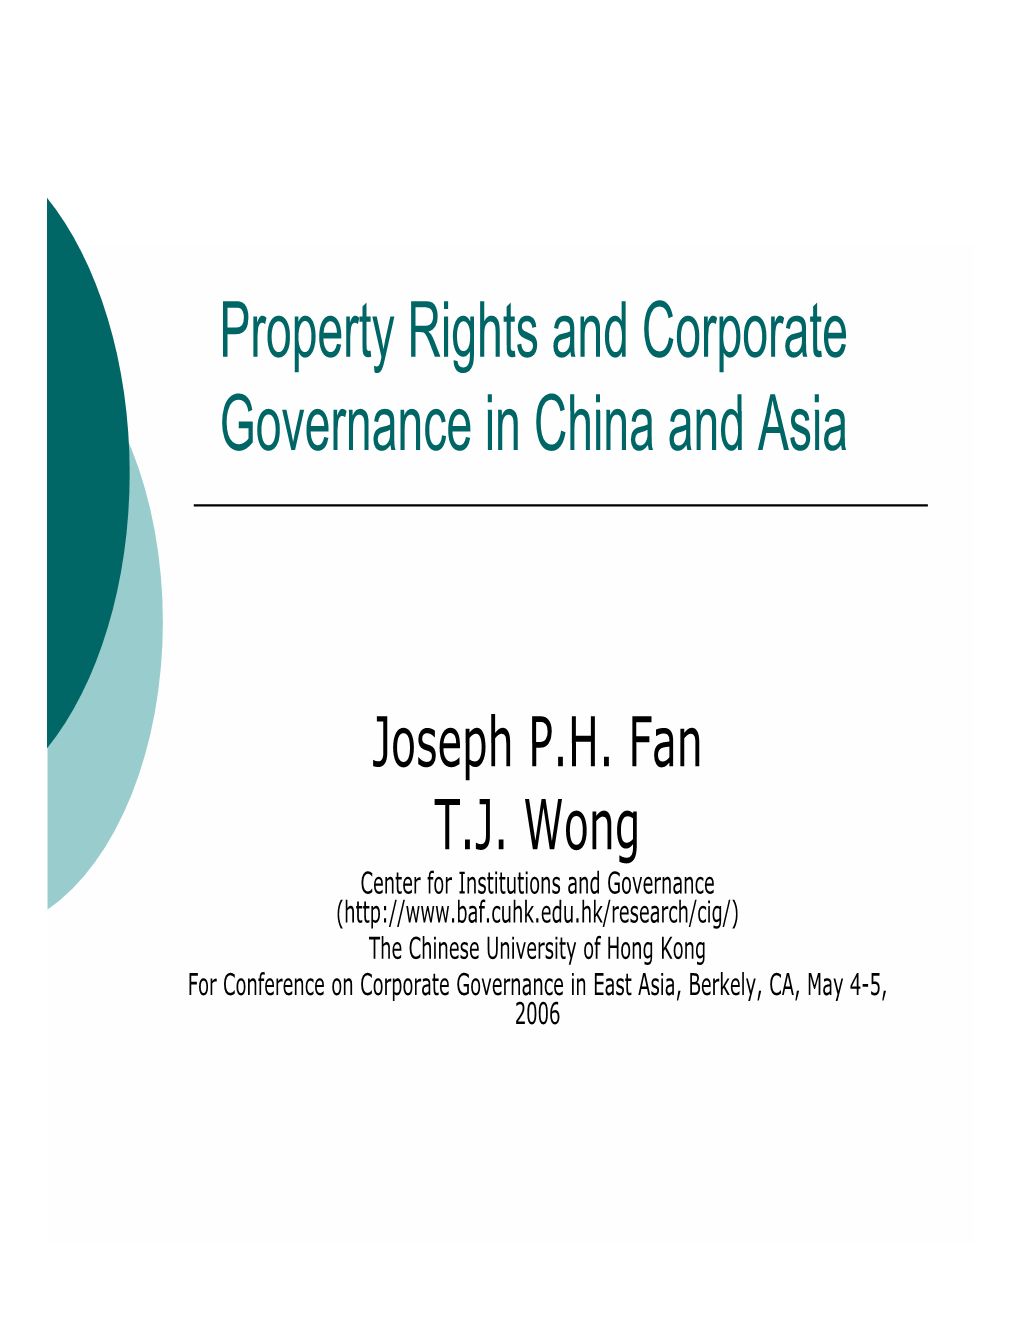 Property Rights and Corporate Governance in China and Asia